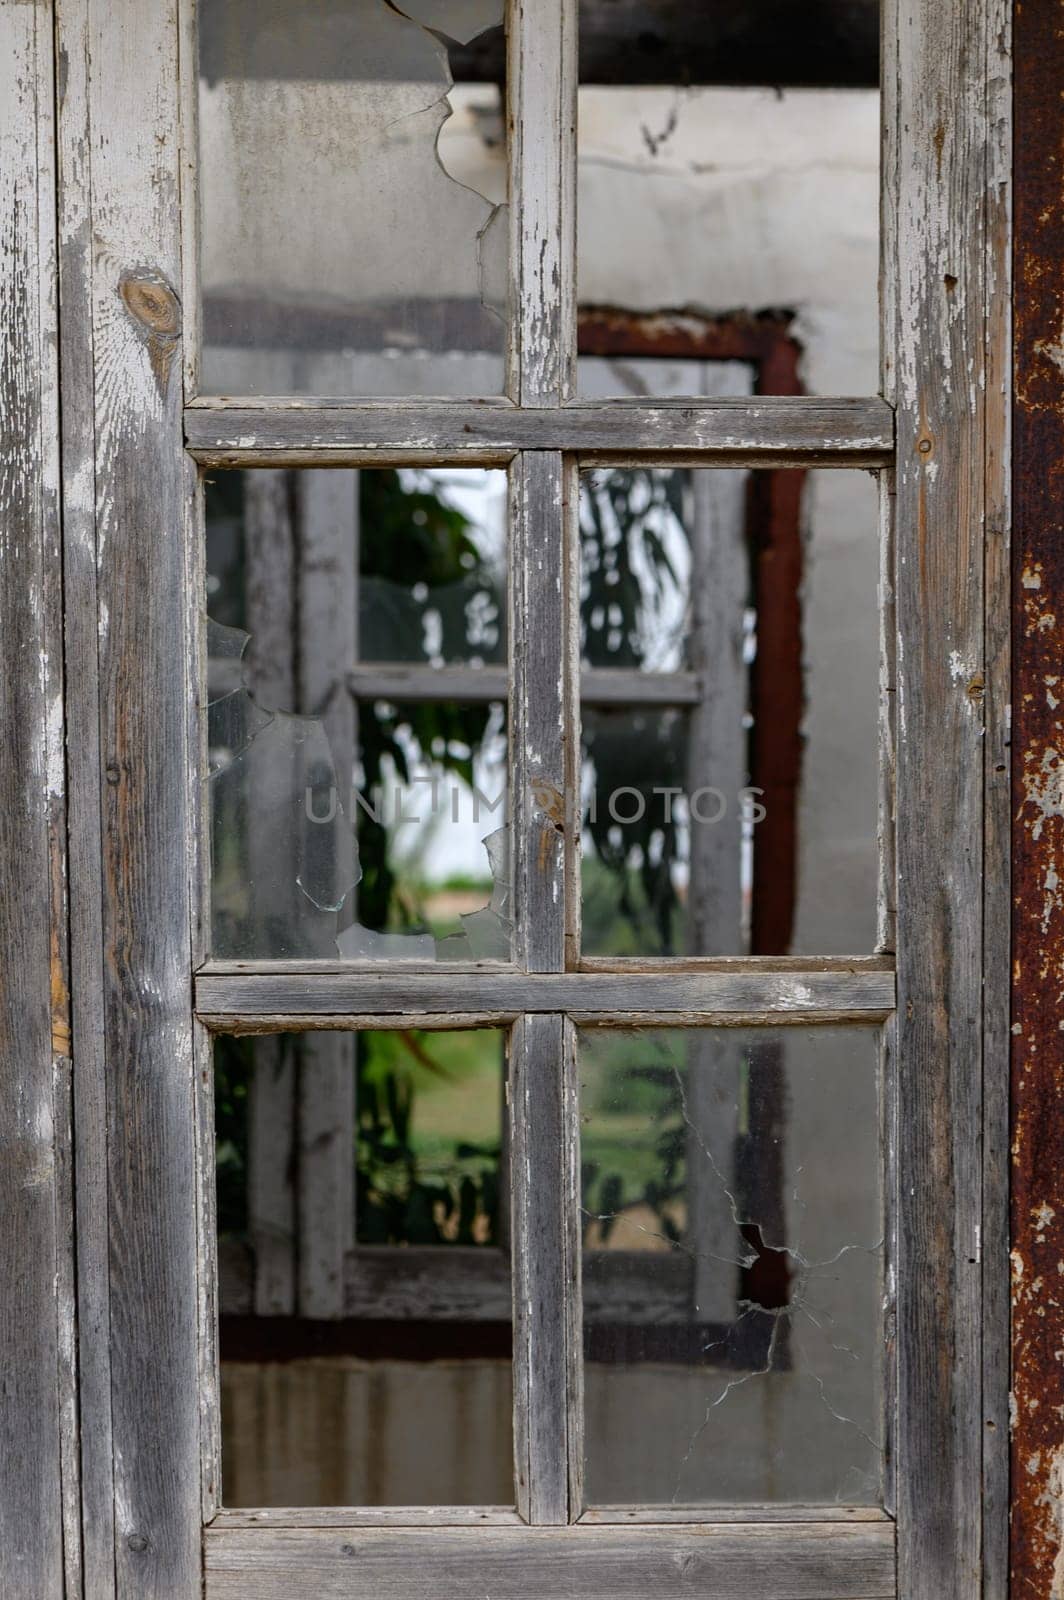 Window with broken glass in old building Wooden window frame with partially broken glass in old abandoned brick building by Mixa74